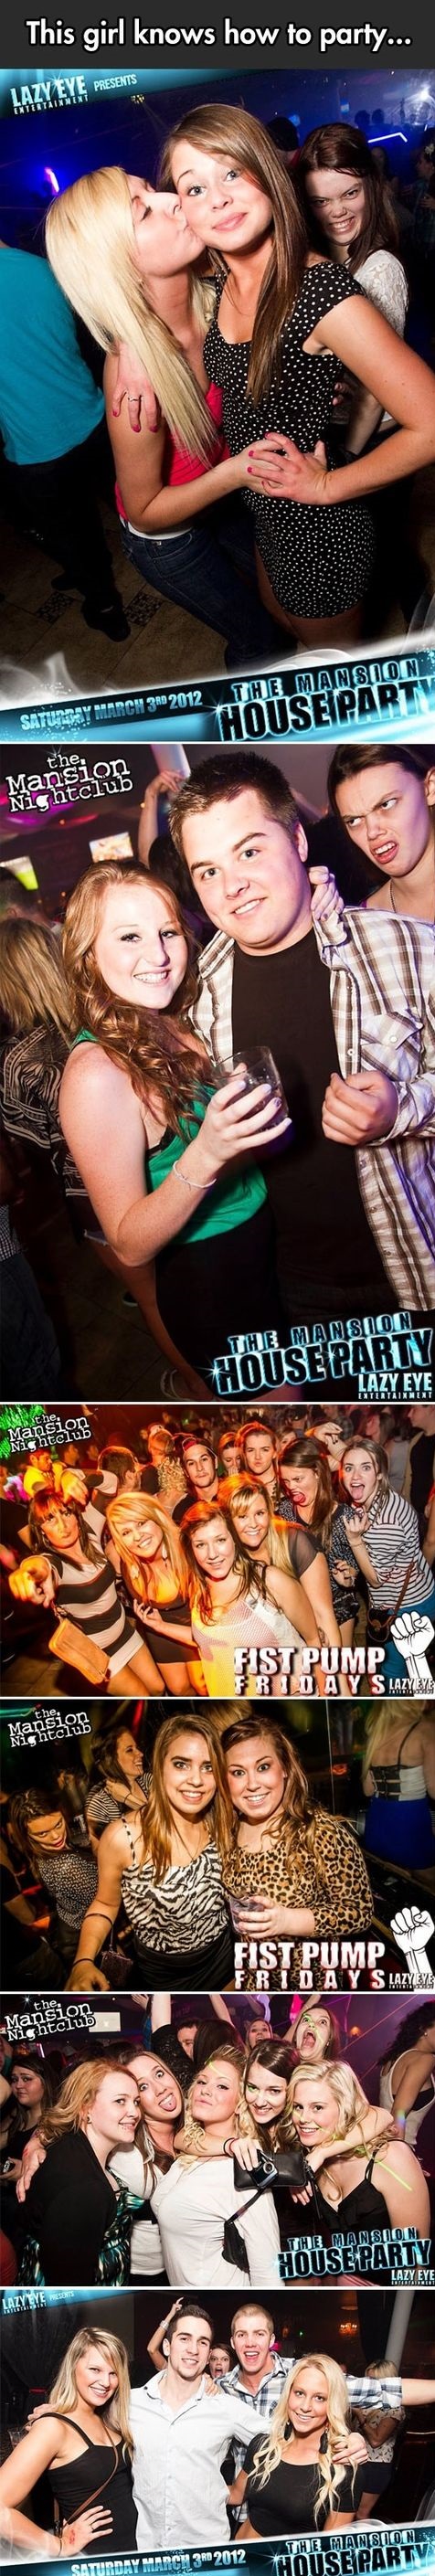 funny-picture-girl-party-photo-bomb